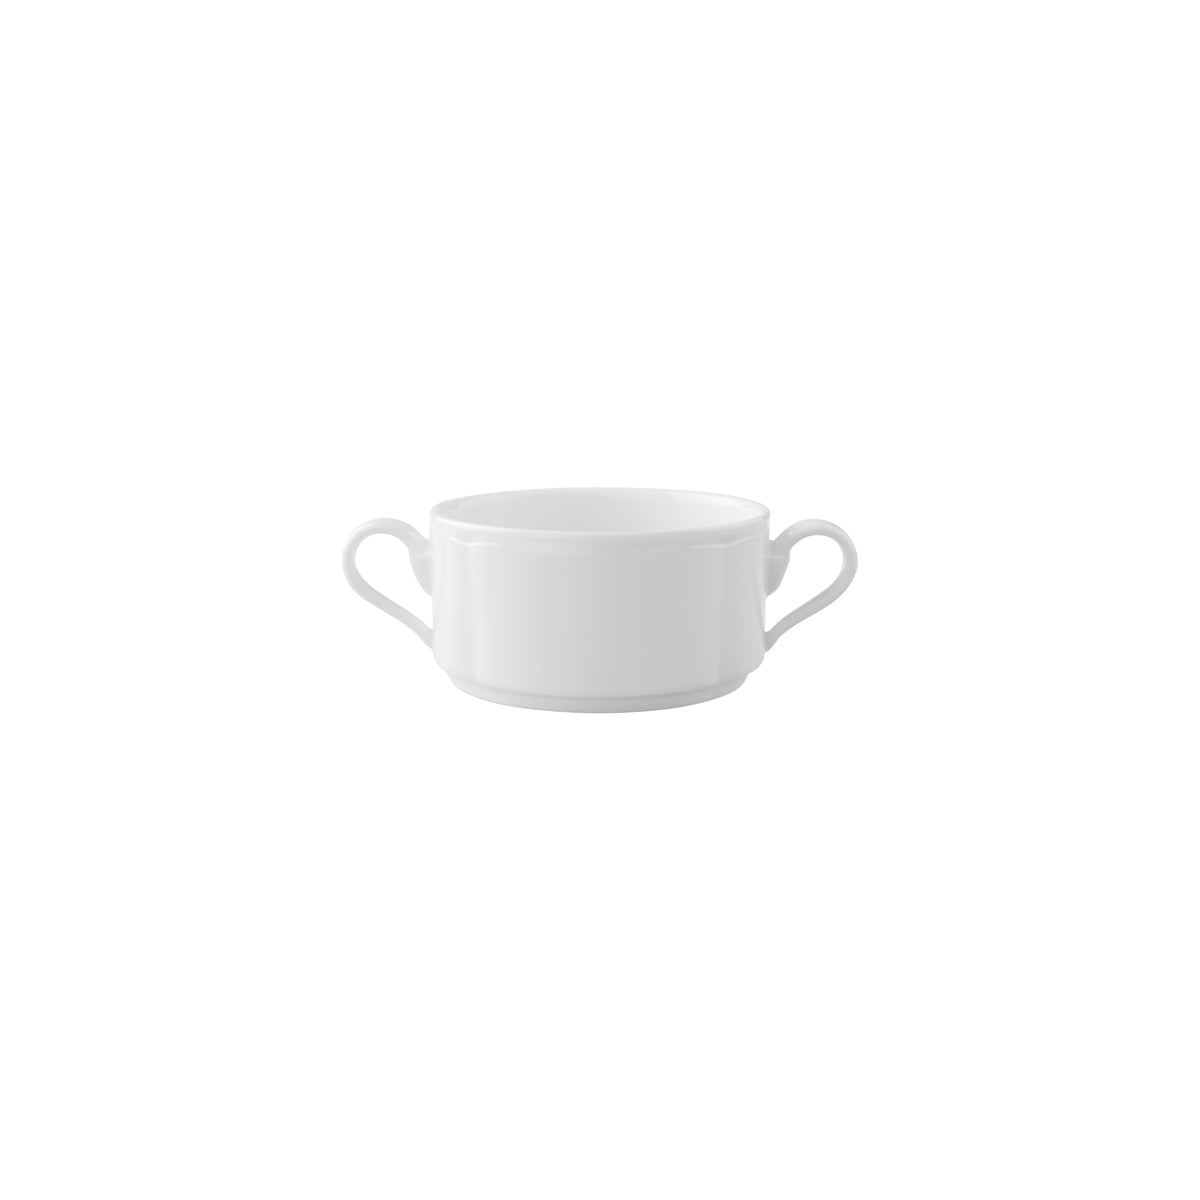 VB16-3318-2513 Villeroy And Boch Villeroy And Boch La Scala White Soup Cup Stackable 400ml Tomkin Australia Hospitality Supplies